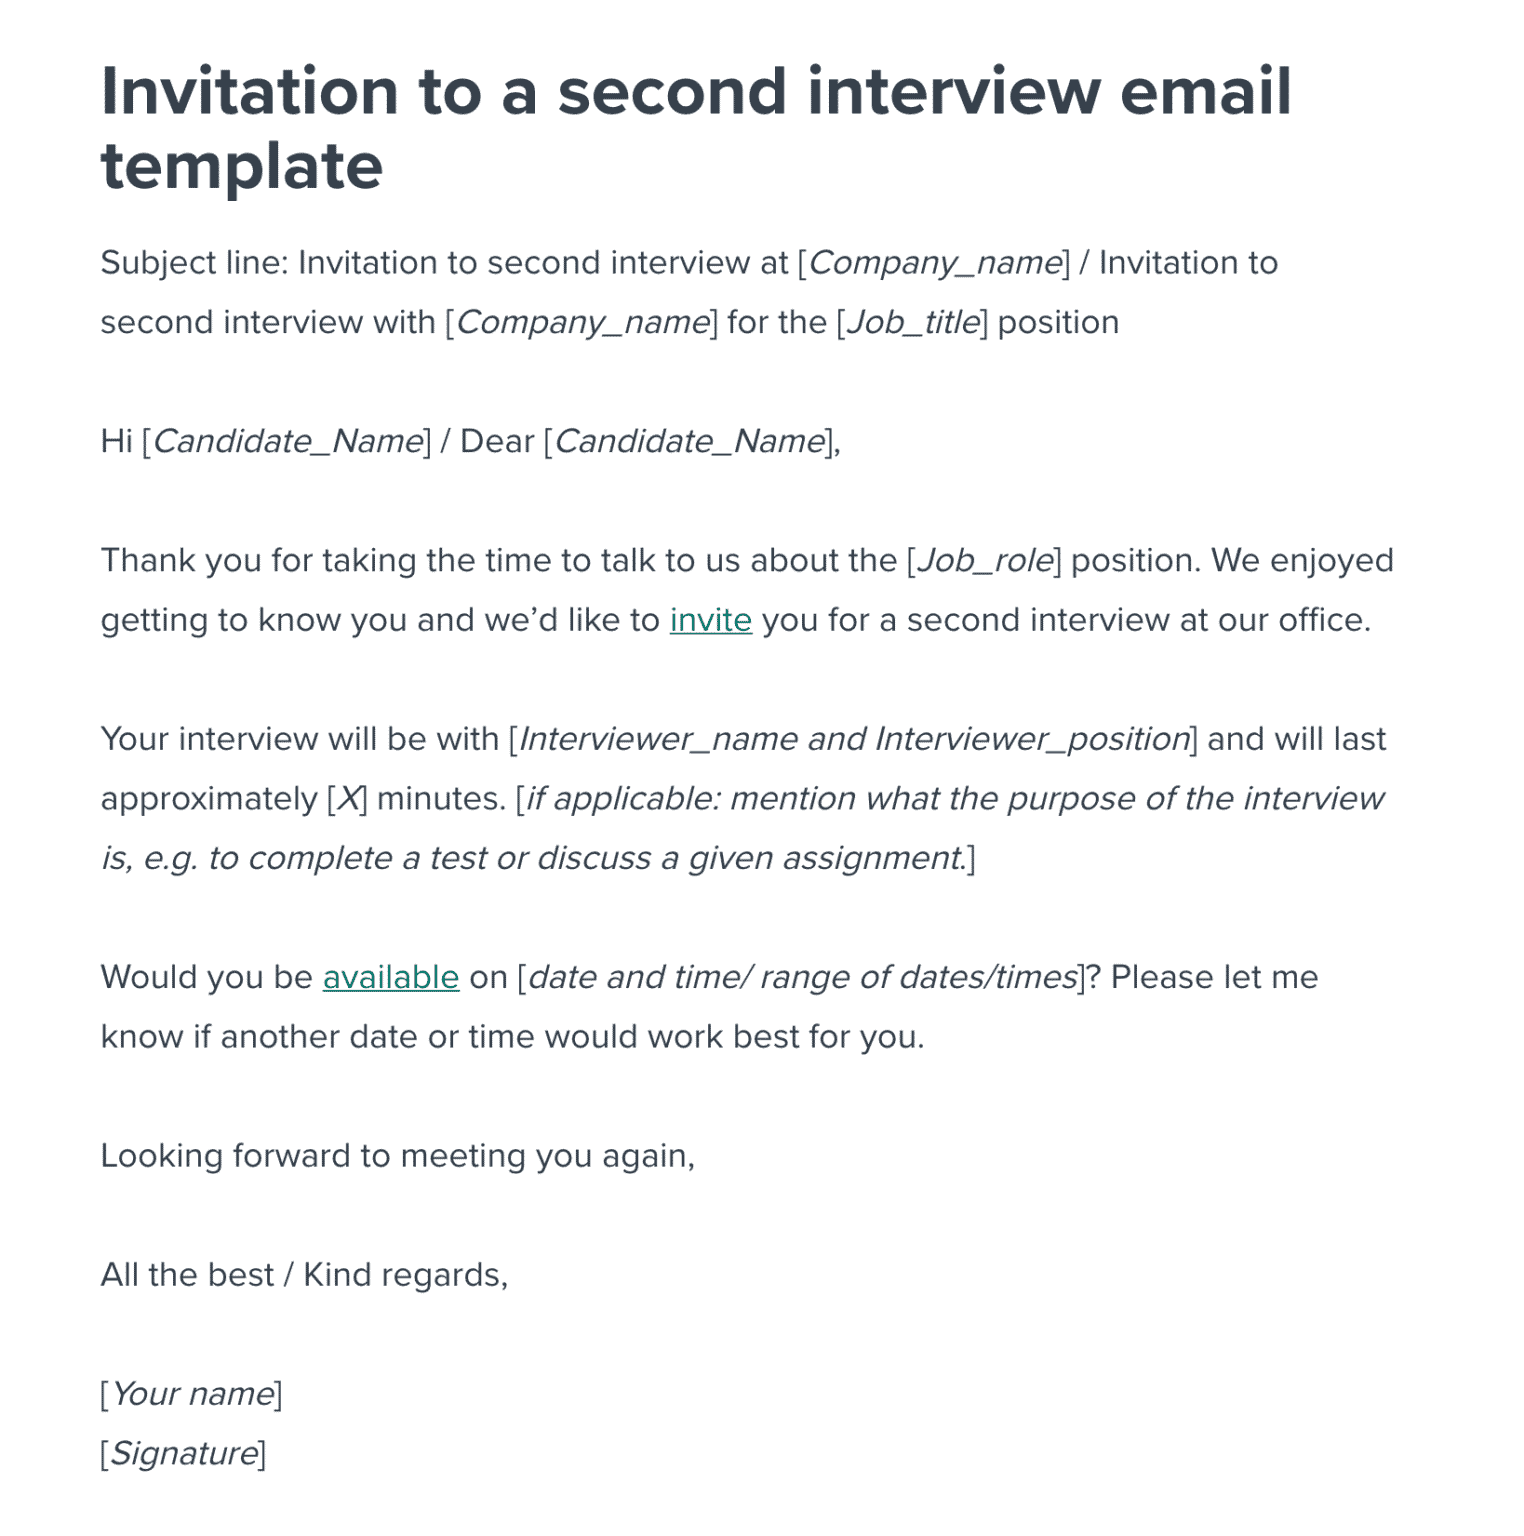 Second Interview Invitation Email Template